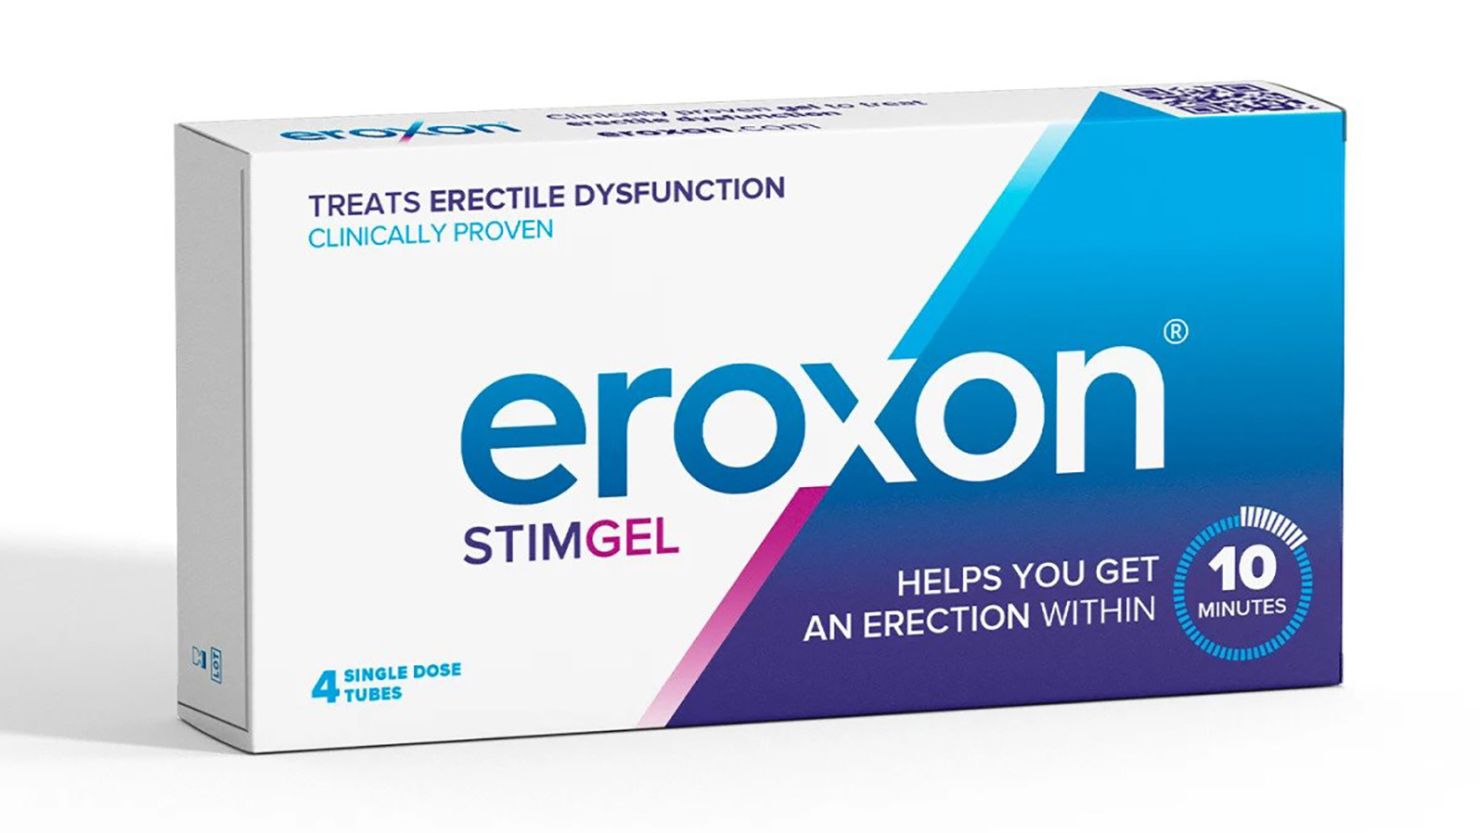 First-of-its-kind erectile dysfunction gel gets FDA's OK for over-the-counter  marketing, company says